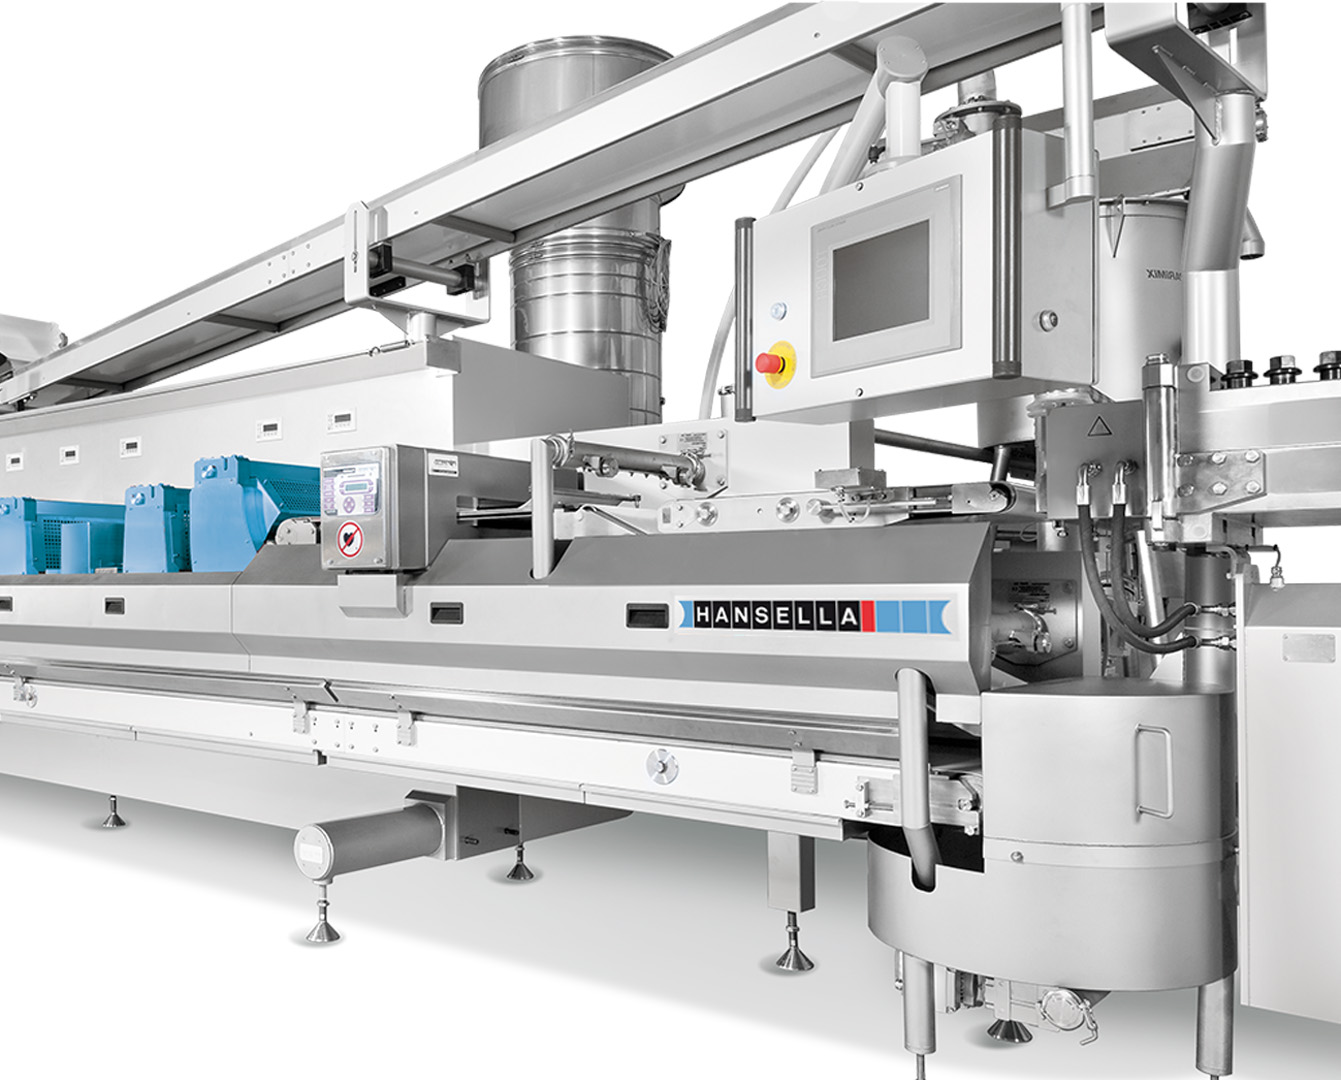 Chewing gum processing machine from Hansella.